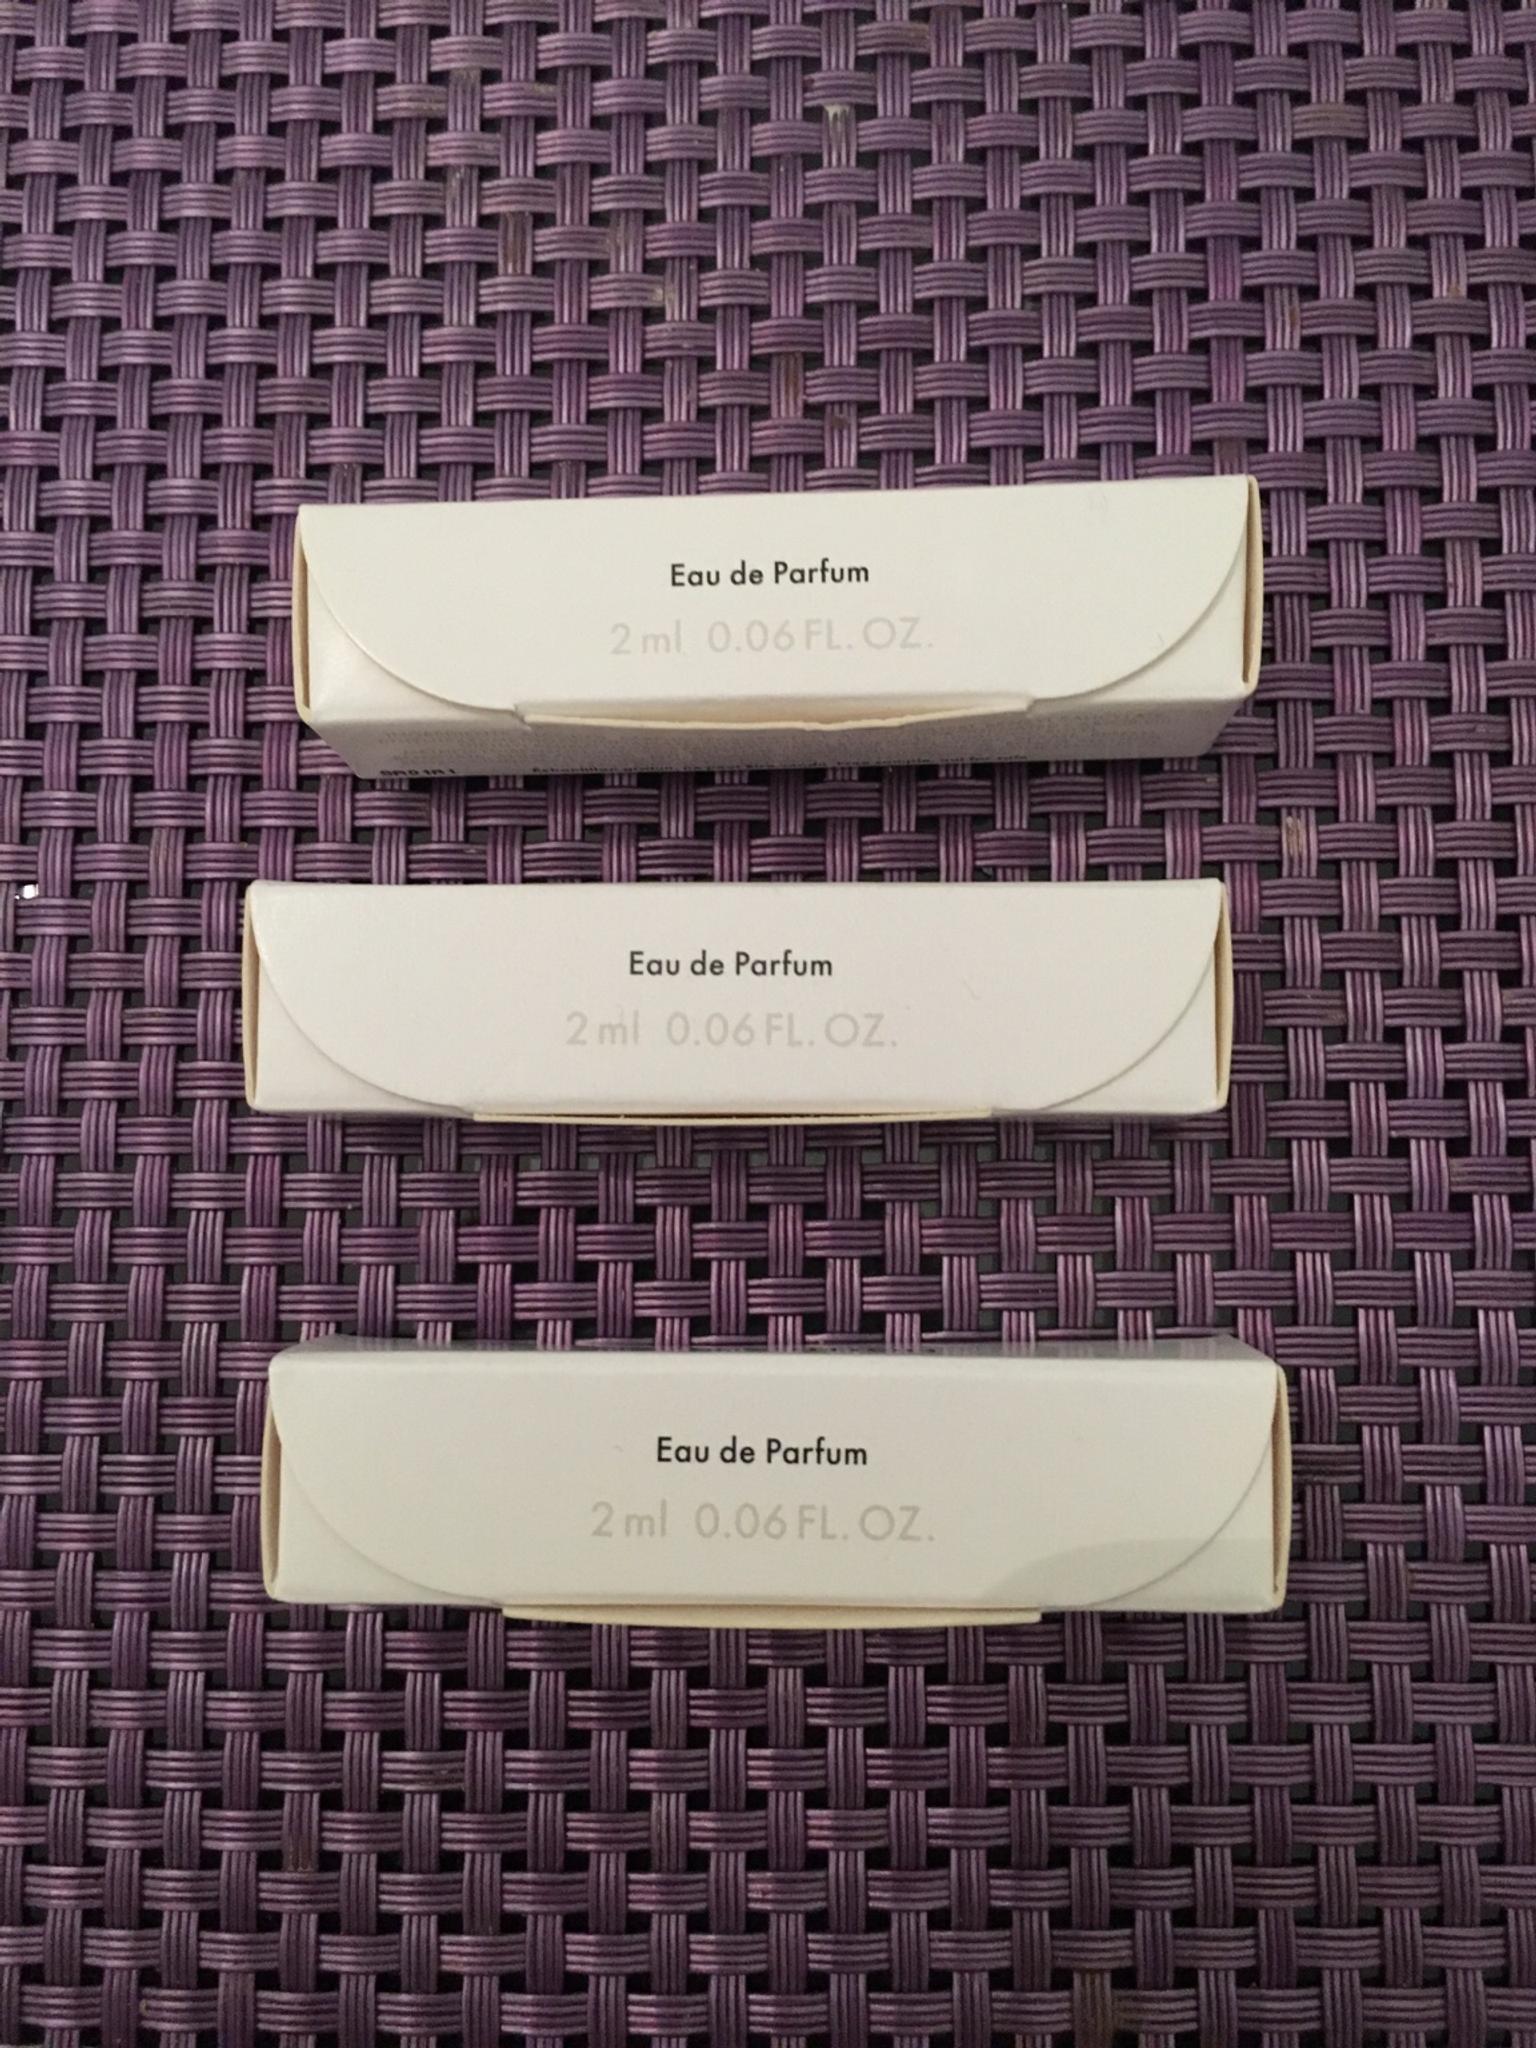 Louis Vuitton perfume sample set 3 x 2ml in SW1W Westminster for £18.00 for sale | Shpock